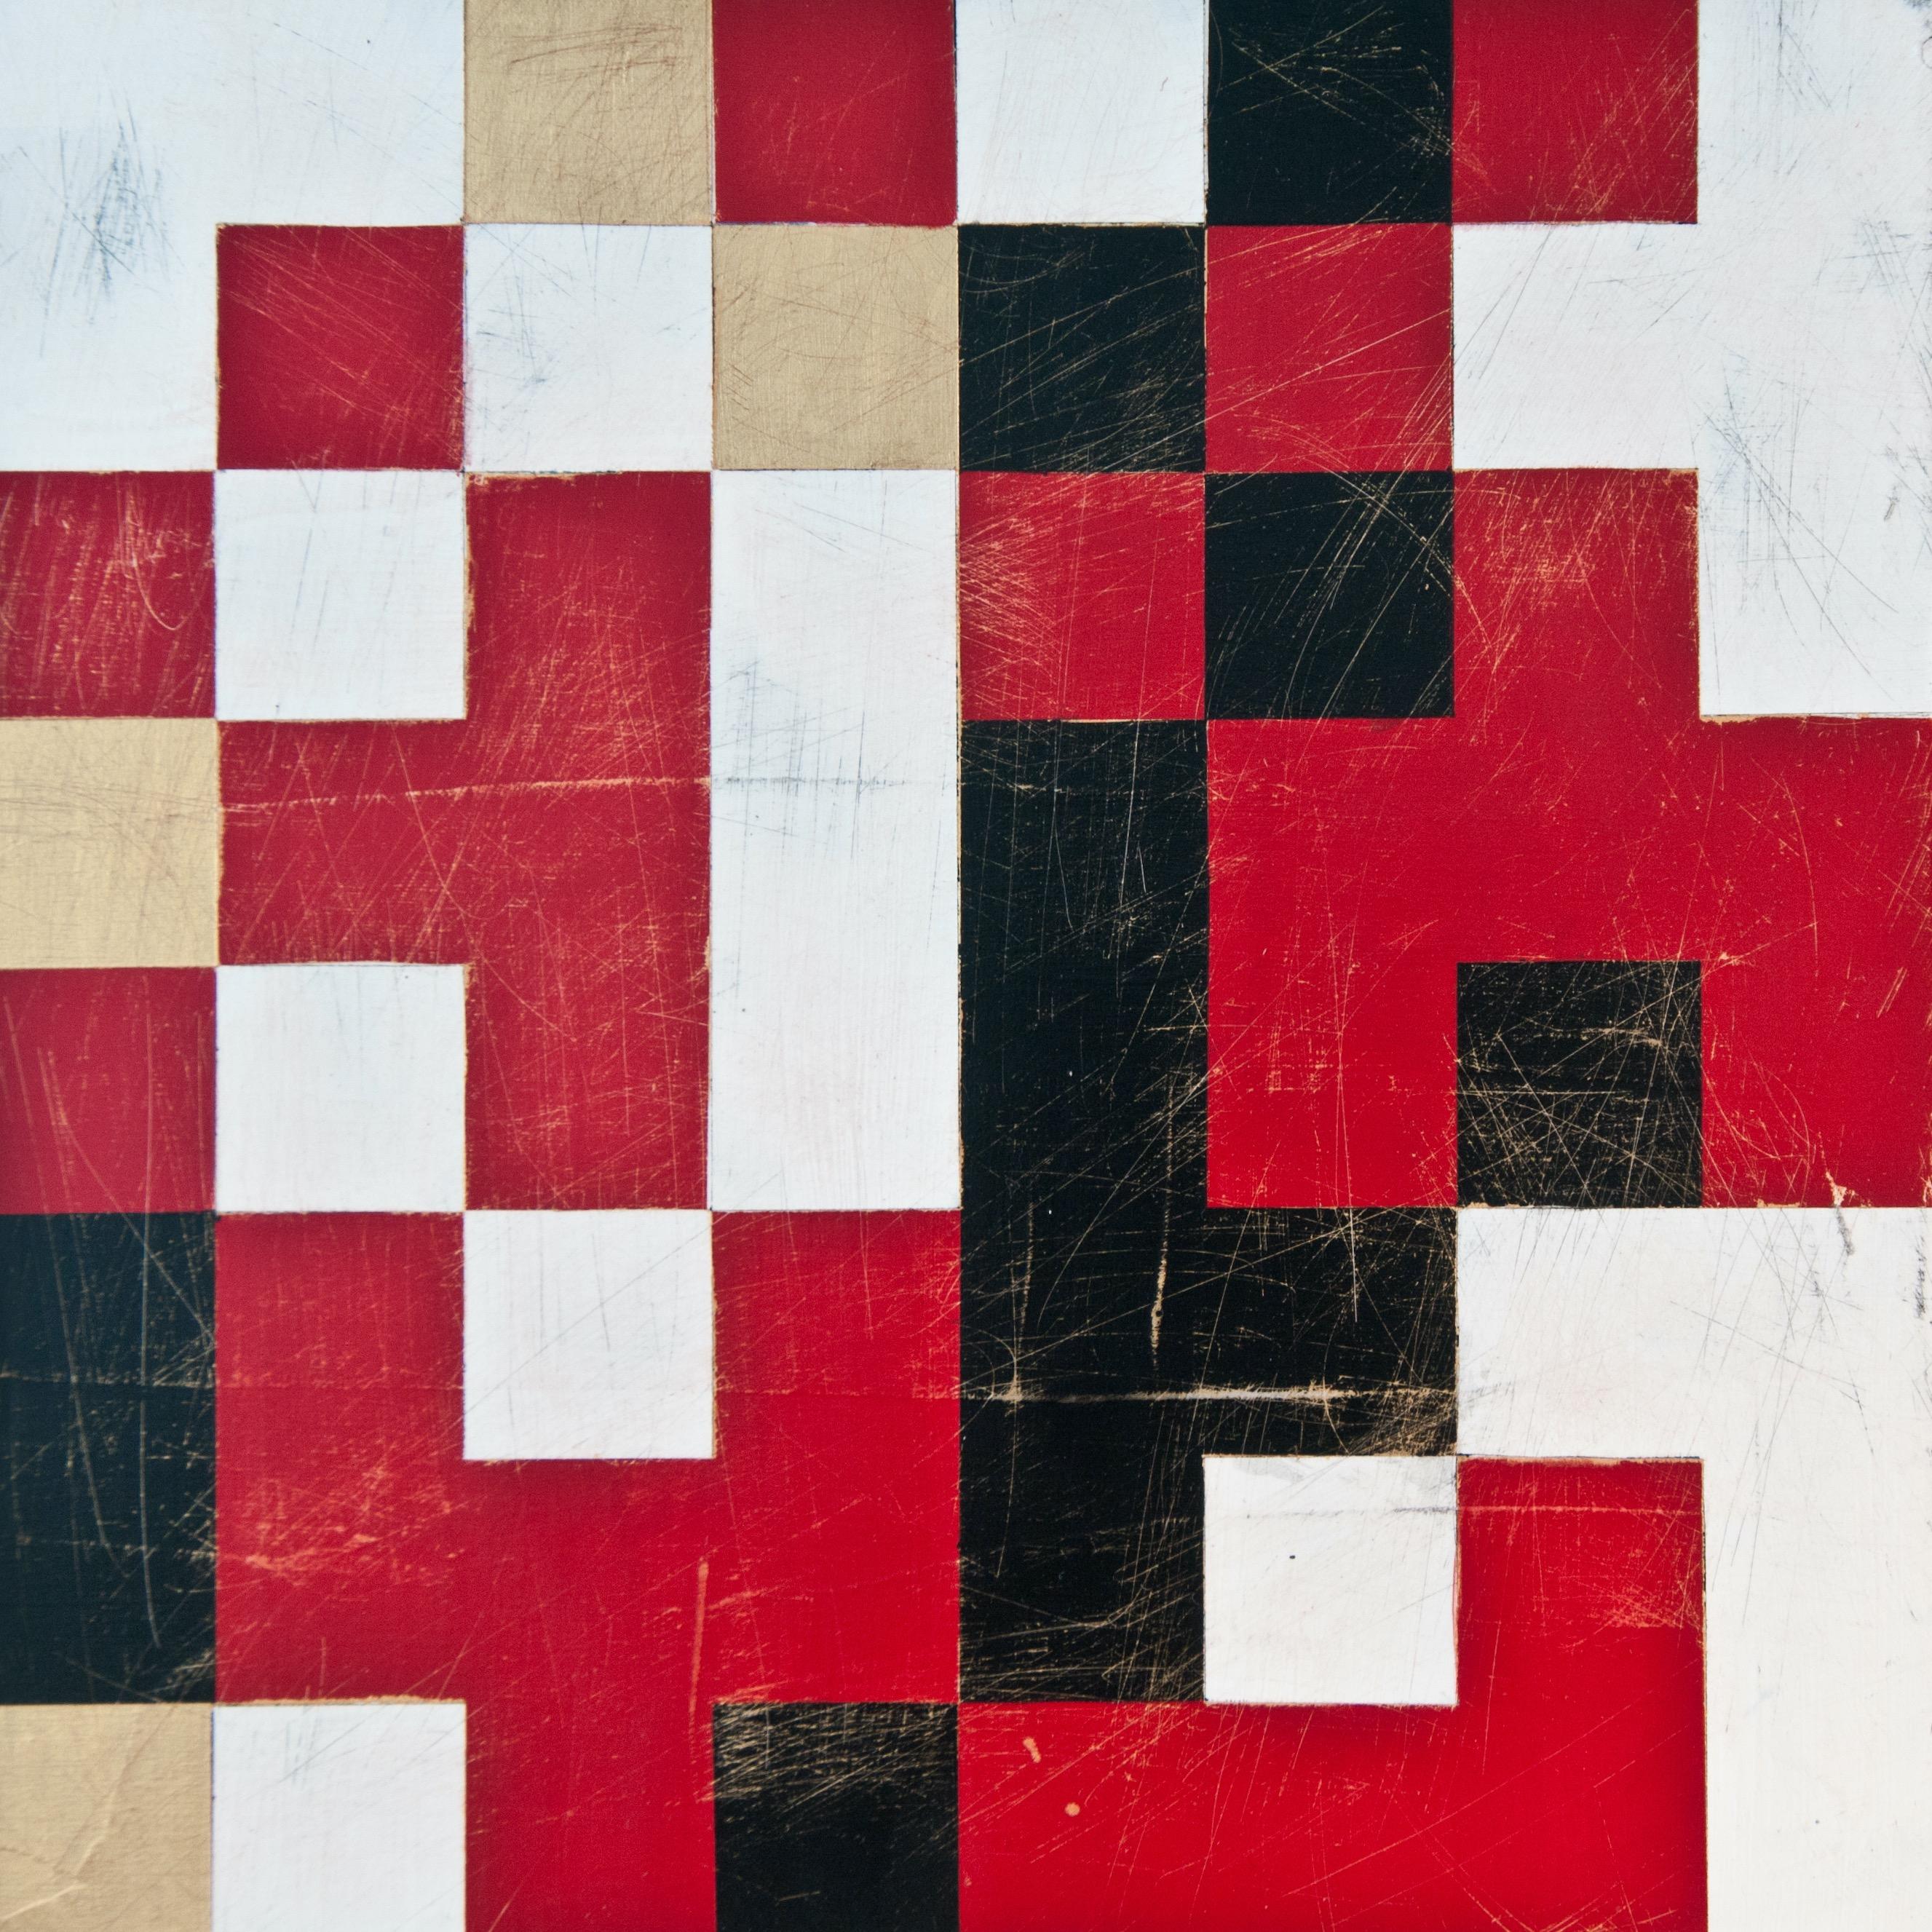 "Cipher Six (Sense)", abstract, geometric, red, black, white, acrylic painting